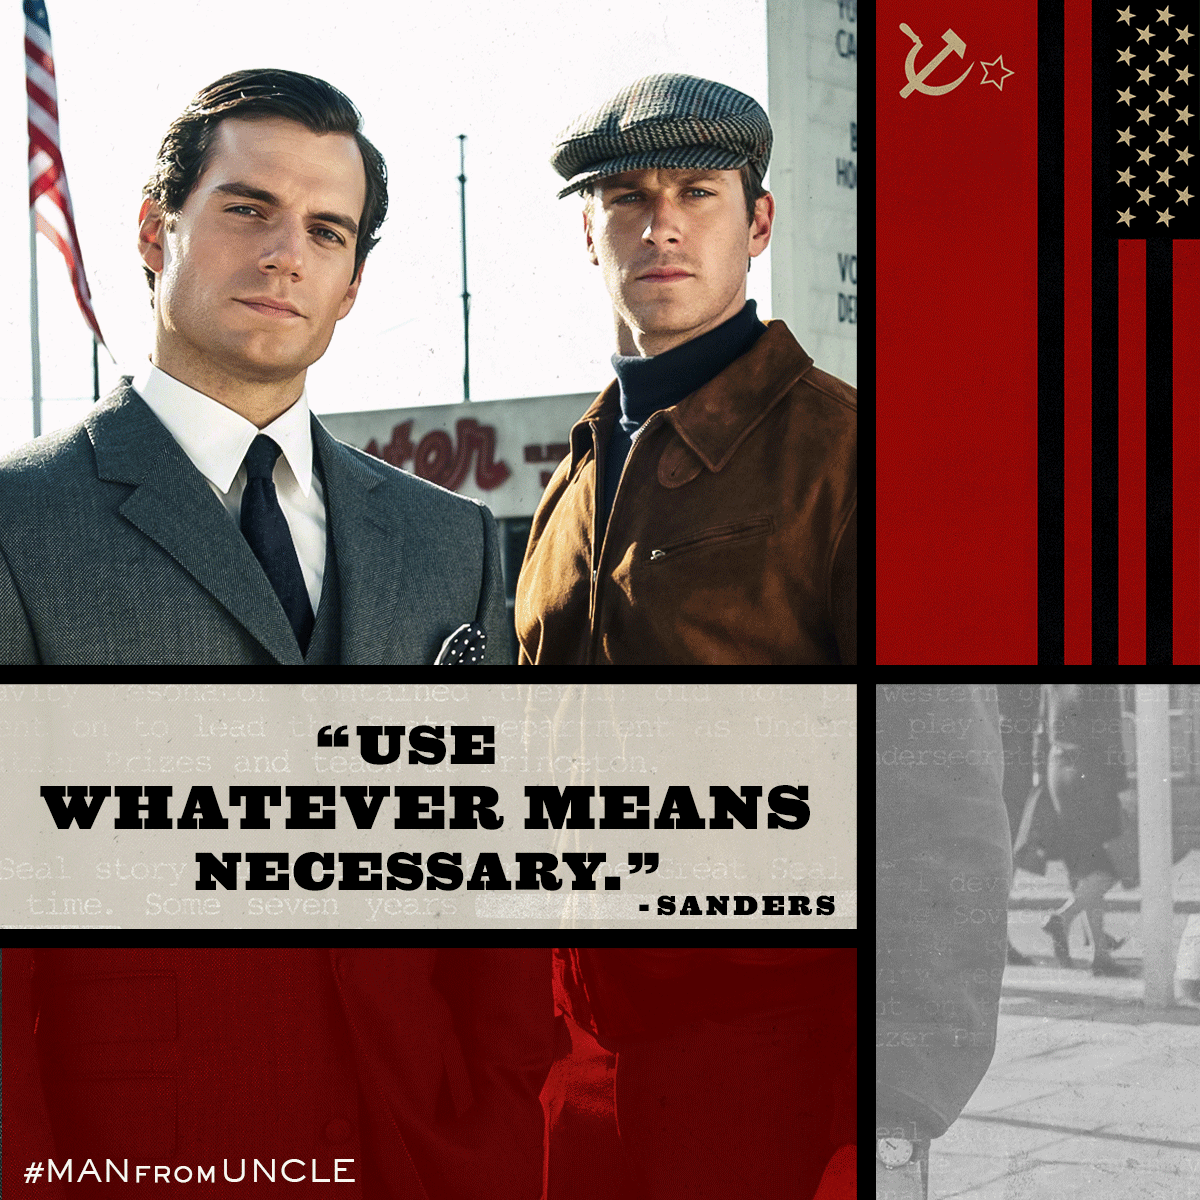 Dear Illya and Solo, this world needs you desperately! Please, come back!
#TheManFromUncle
#ArmieHammer 
#HenryCavill